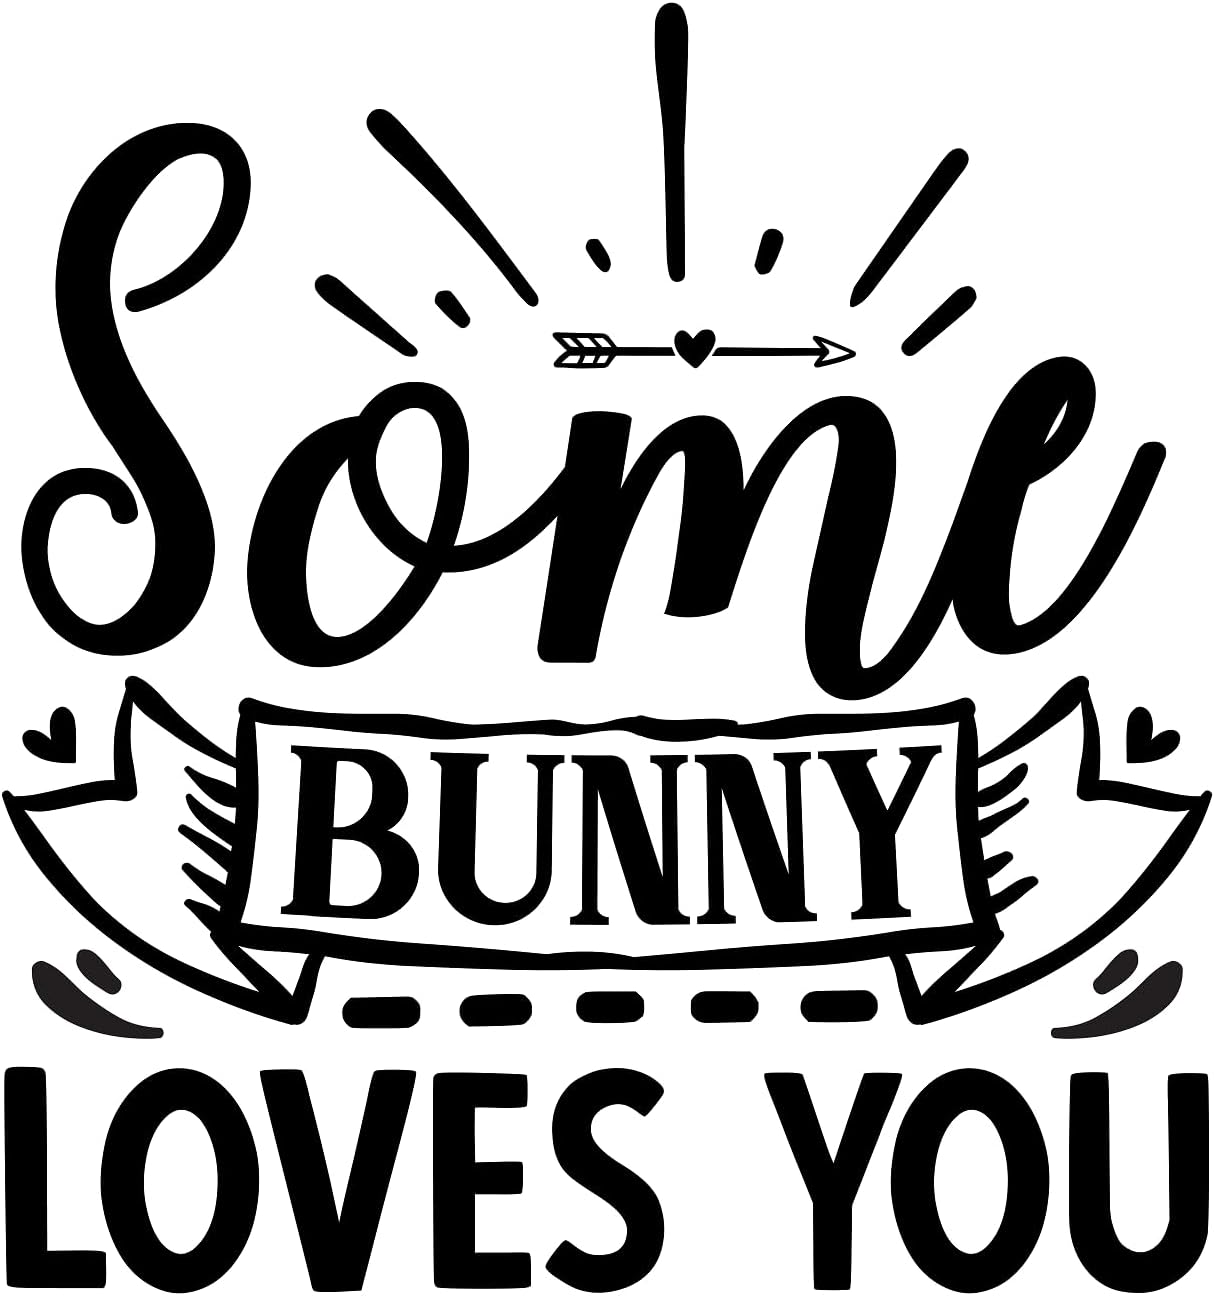 Inspirational Quote "Some Bunny Loves You" Motivational Sticker Vinyl Decal Motivation Stickers- 5" Vinyl Sticker Waterproof